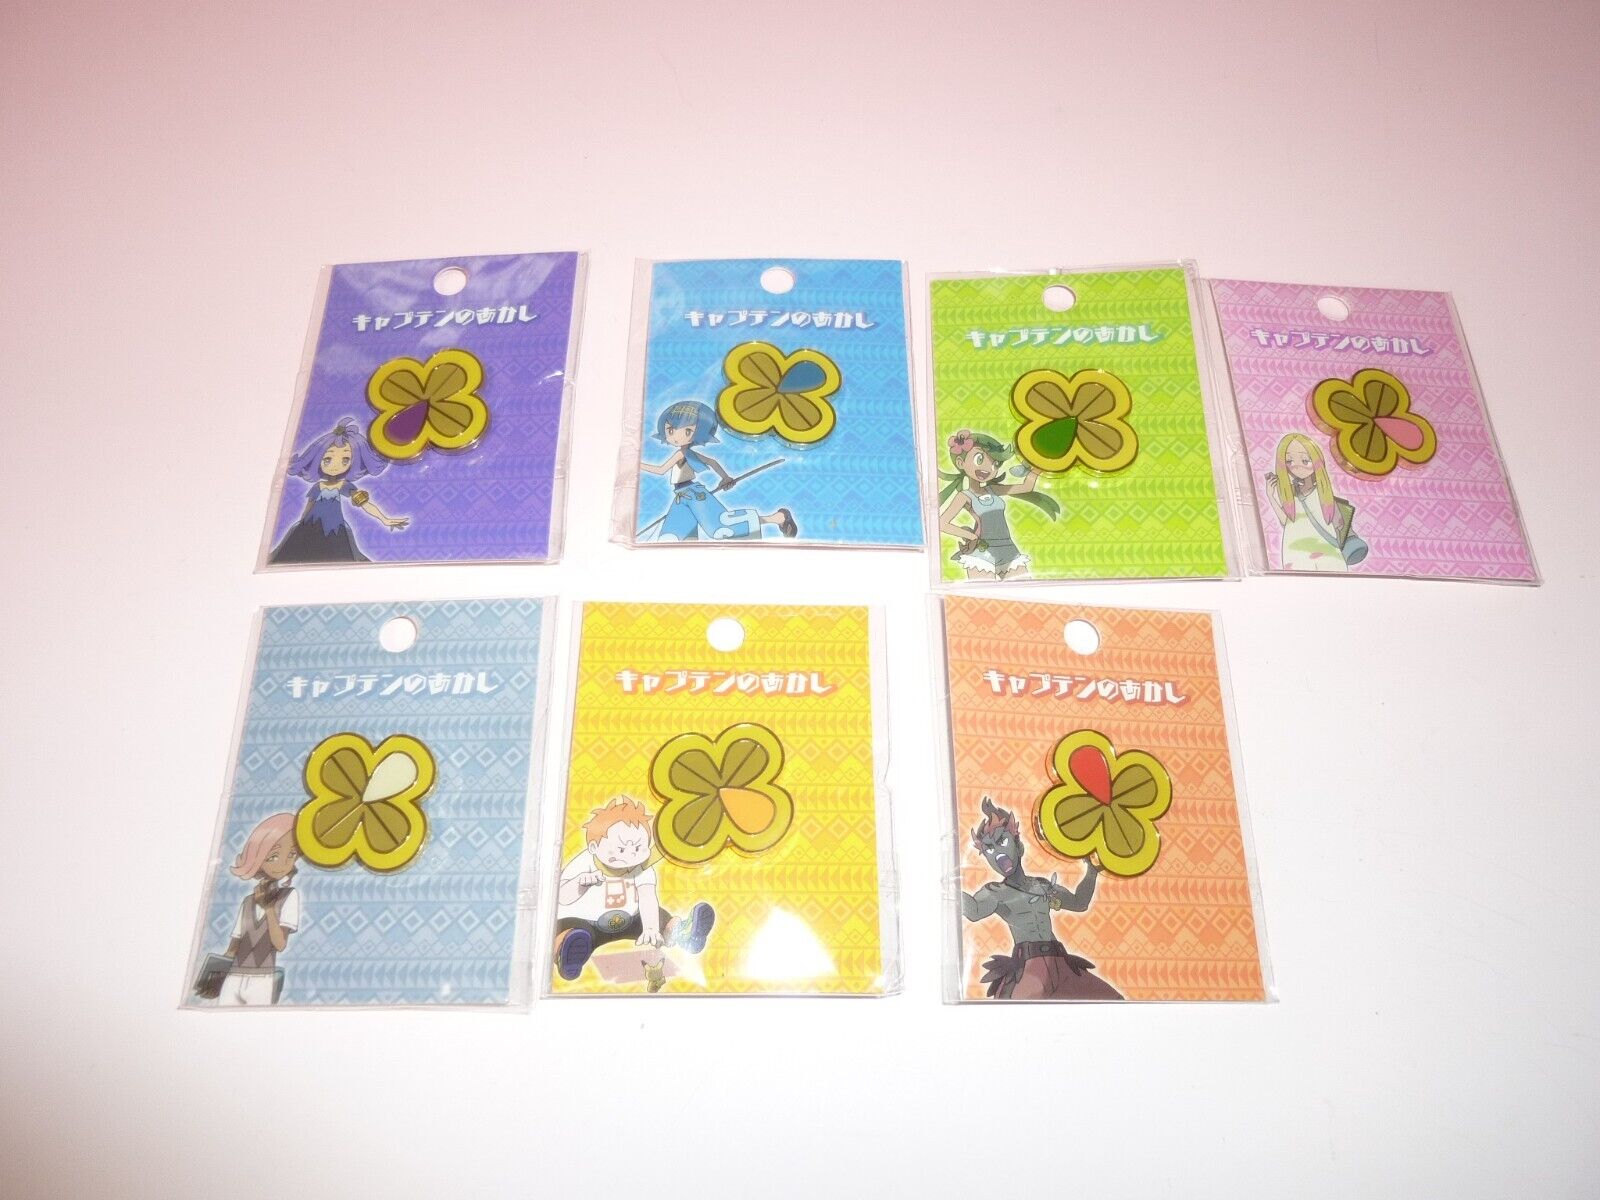 Lot 7 Pokemon Proof of Trial Captain Pin Pins Badge 7pcs complete set